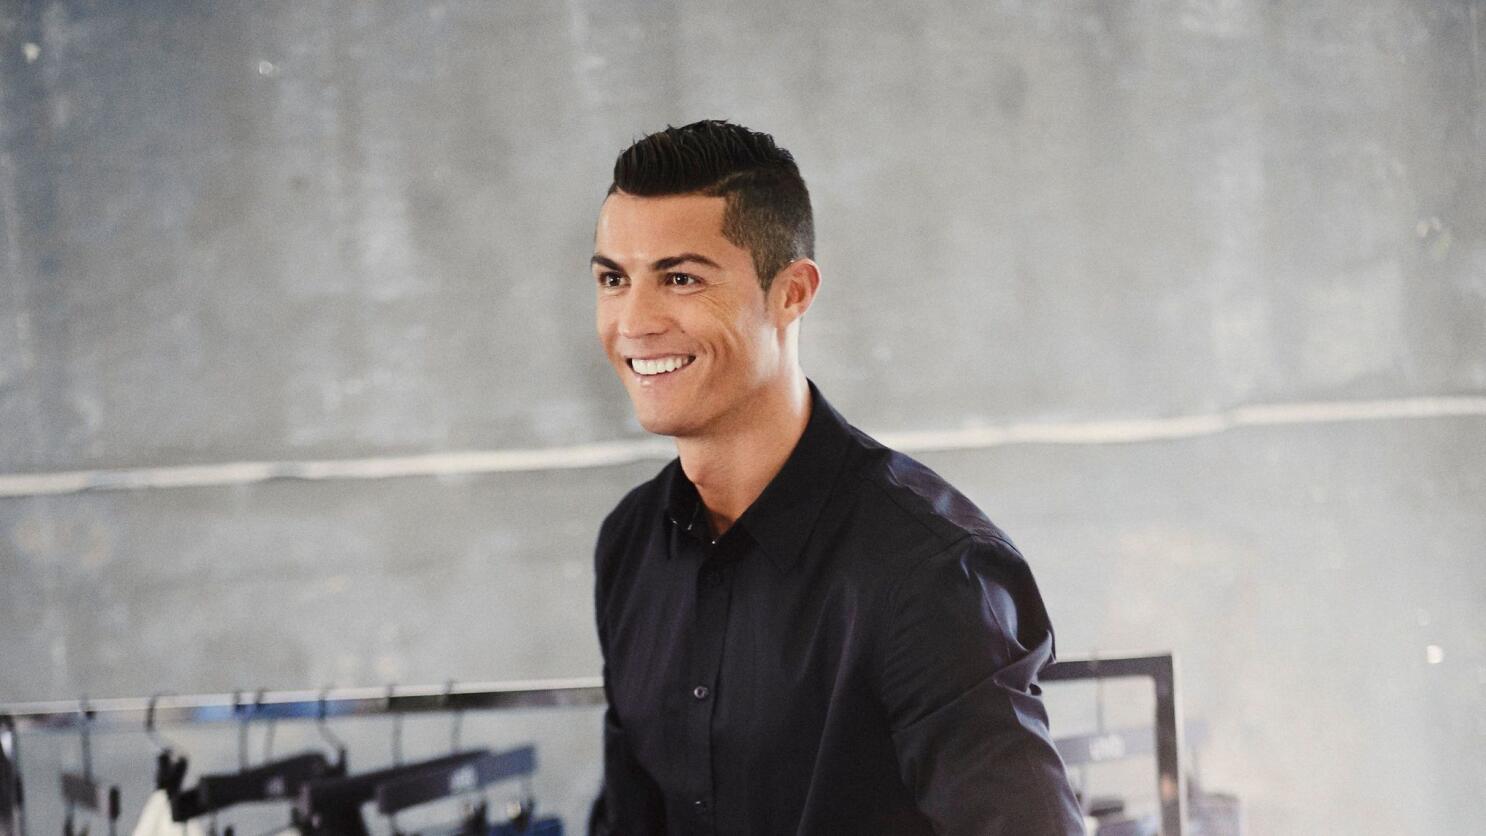 Cristiano Ronaldo's 7 Most Subtle (and Therefore Best) Style Moves